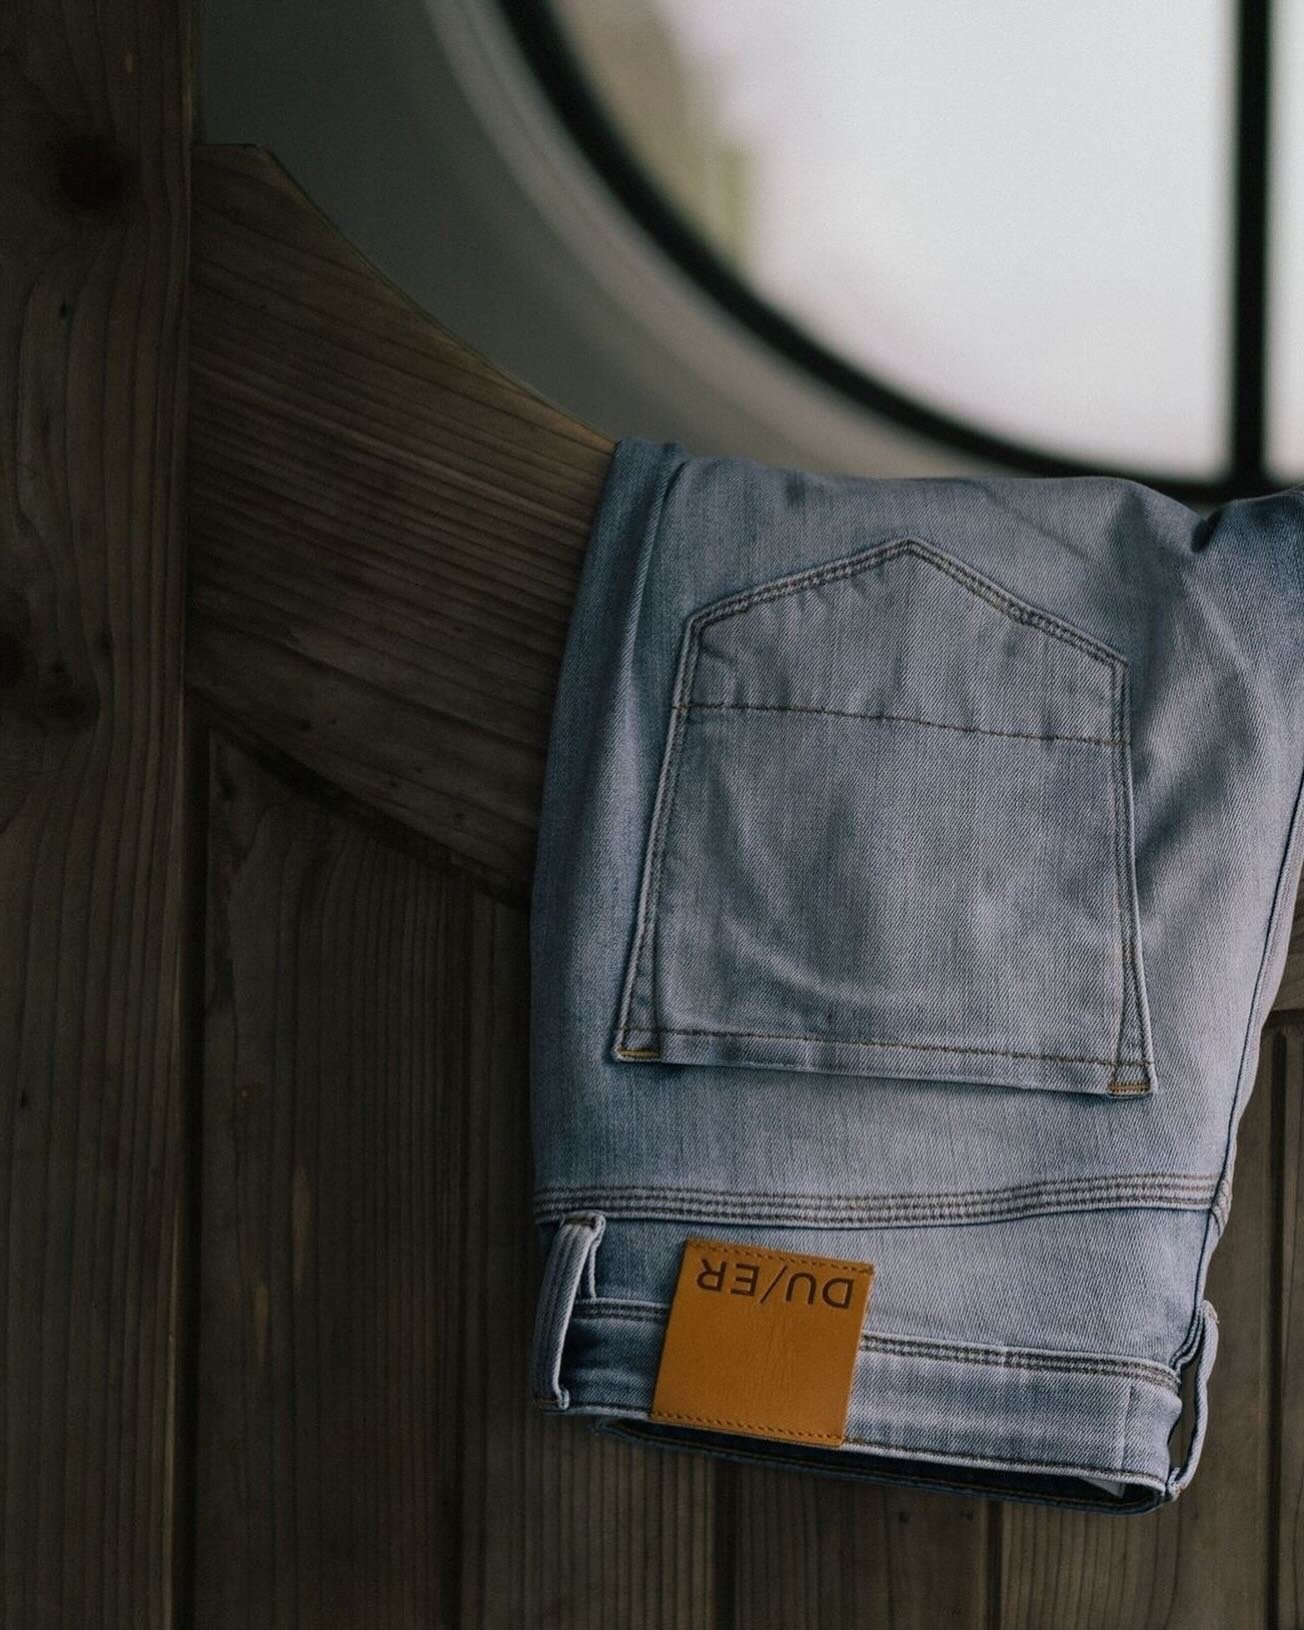 Lighter, brighter washes for the warmer and brighter spring and summer days ahead. Hit us up for new colors in @duerperformance denim and no sweat pants along with new fits and washes in @dl1961denim and @warpweftworld stretch denim. 
.
Shop Hours:
T